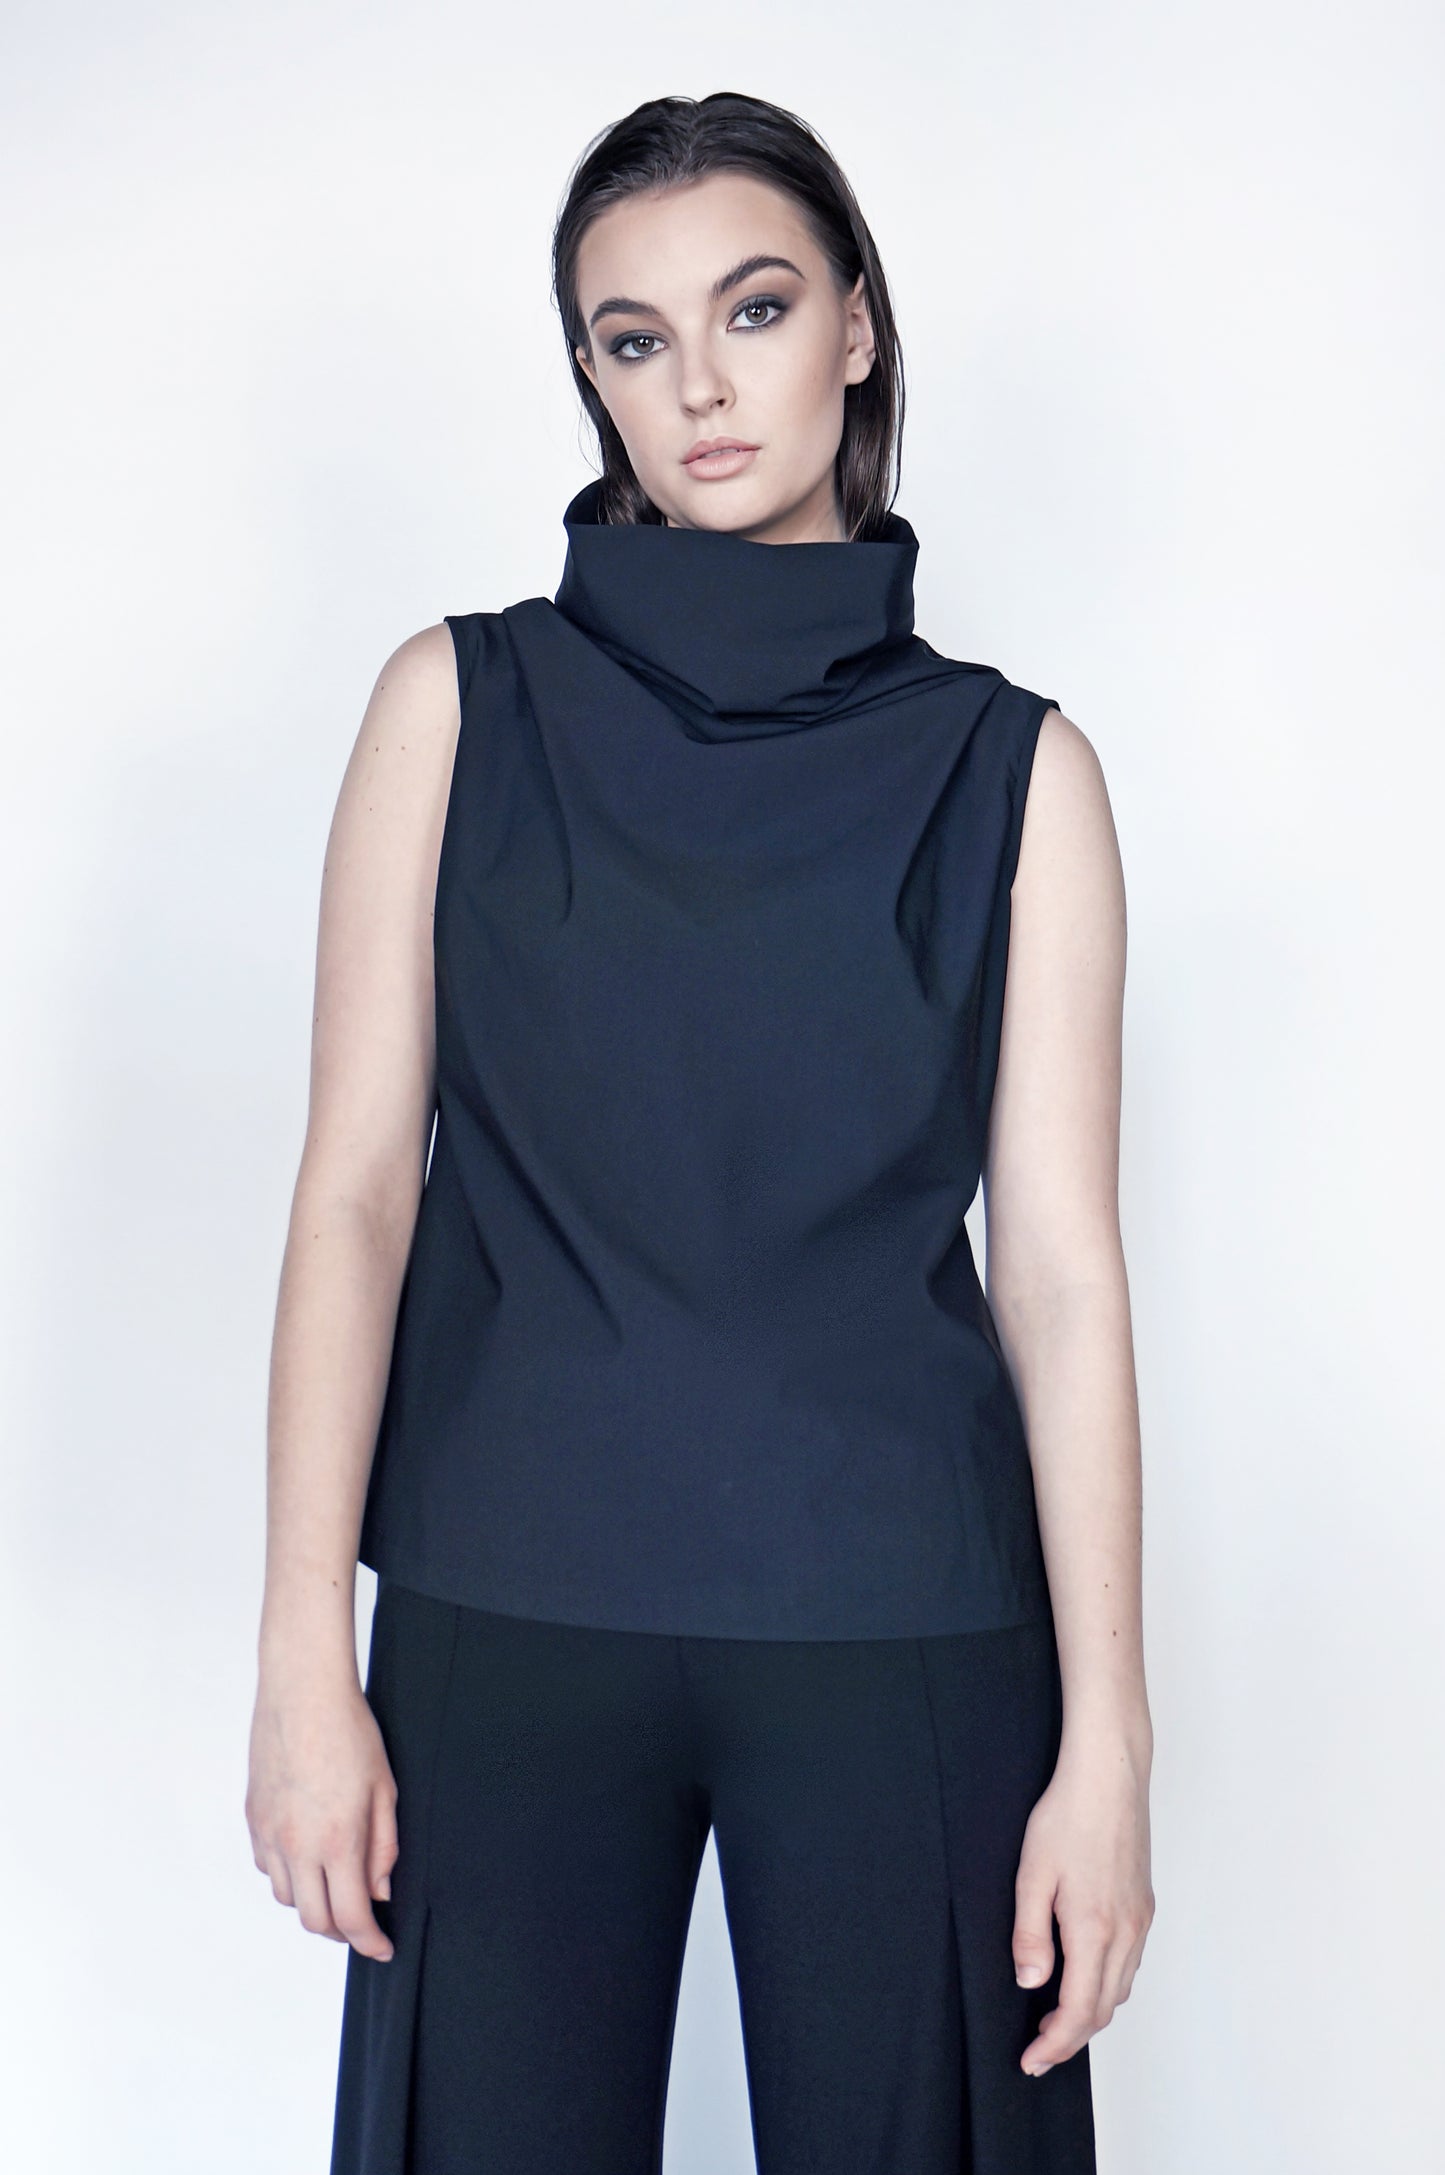 The Veiled Turtleneck Top